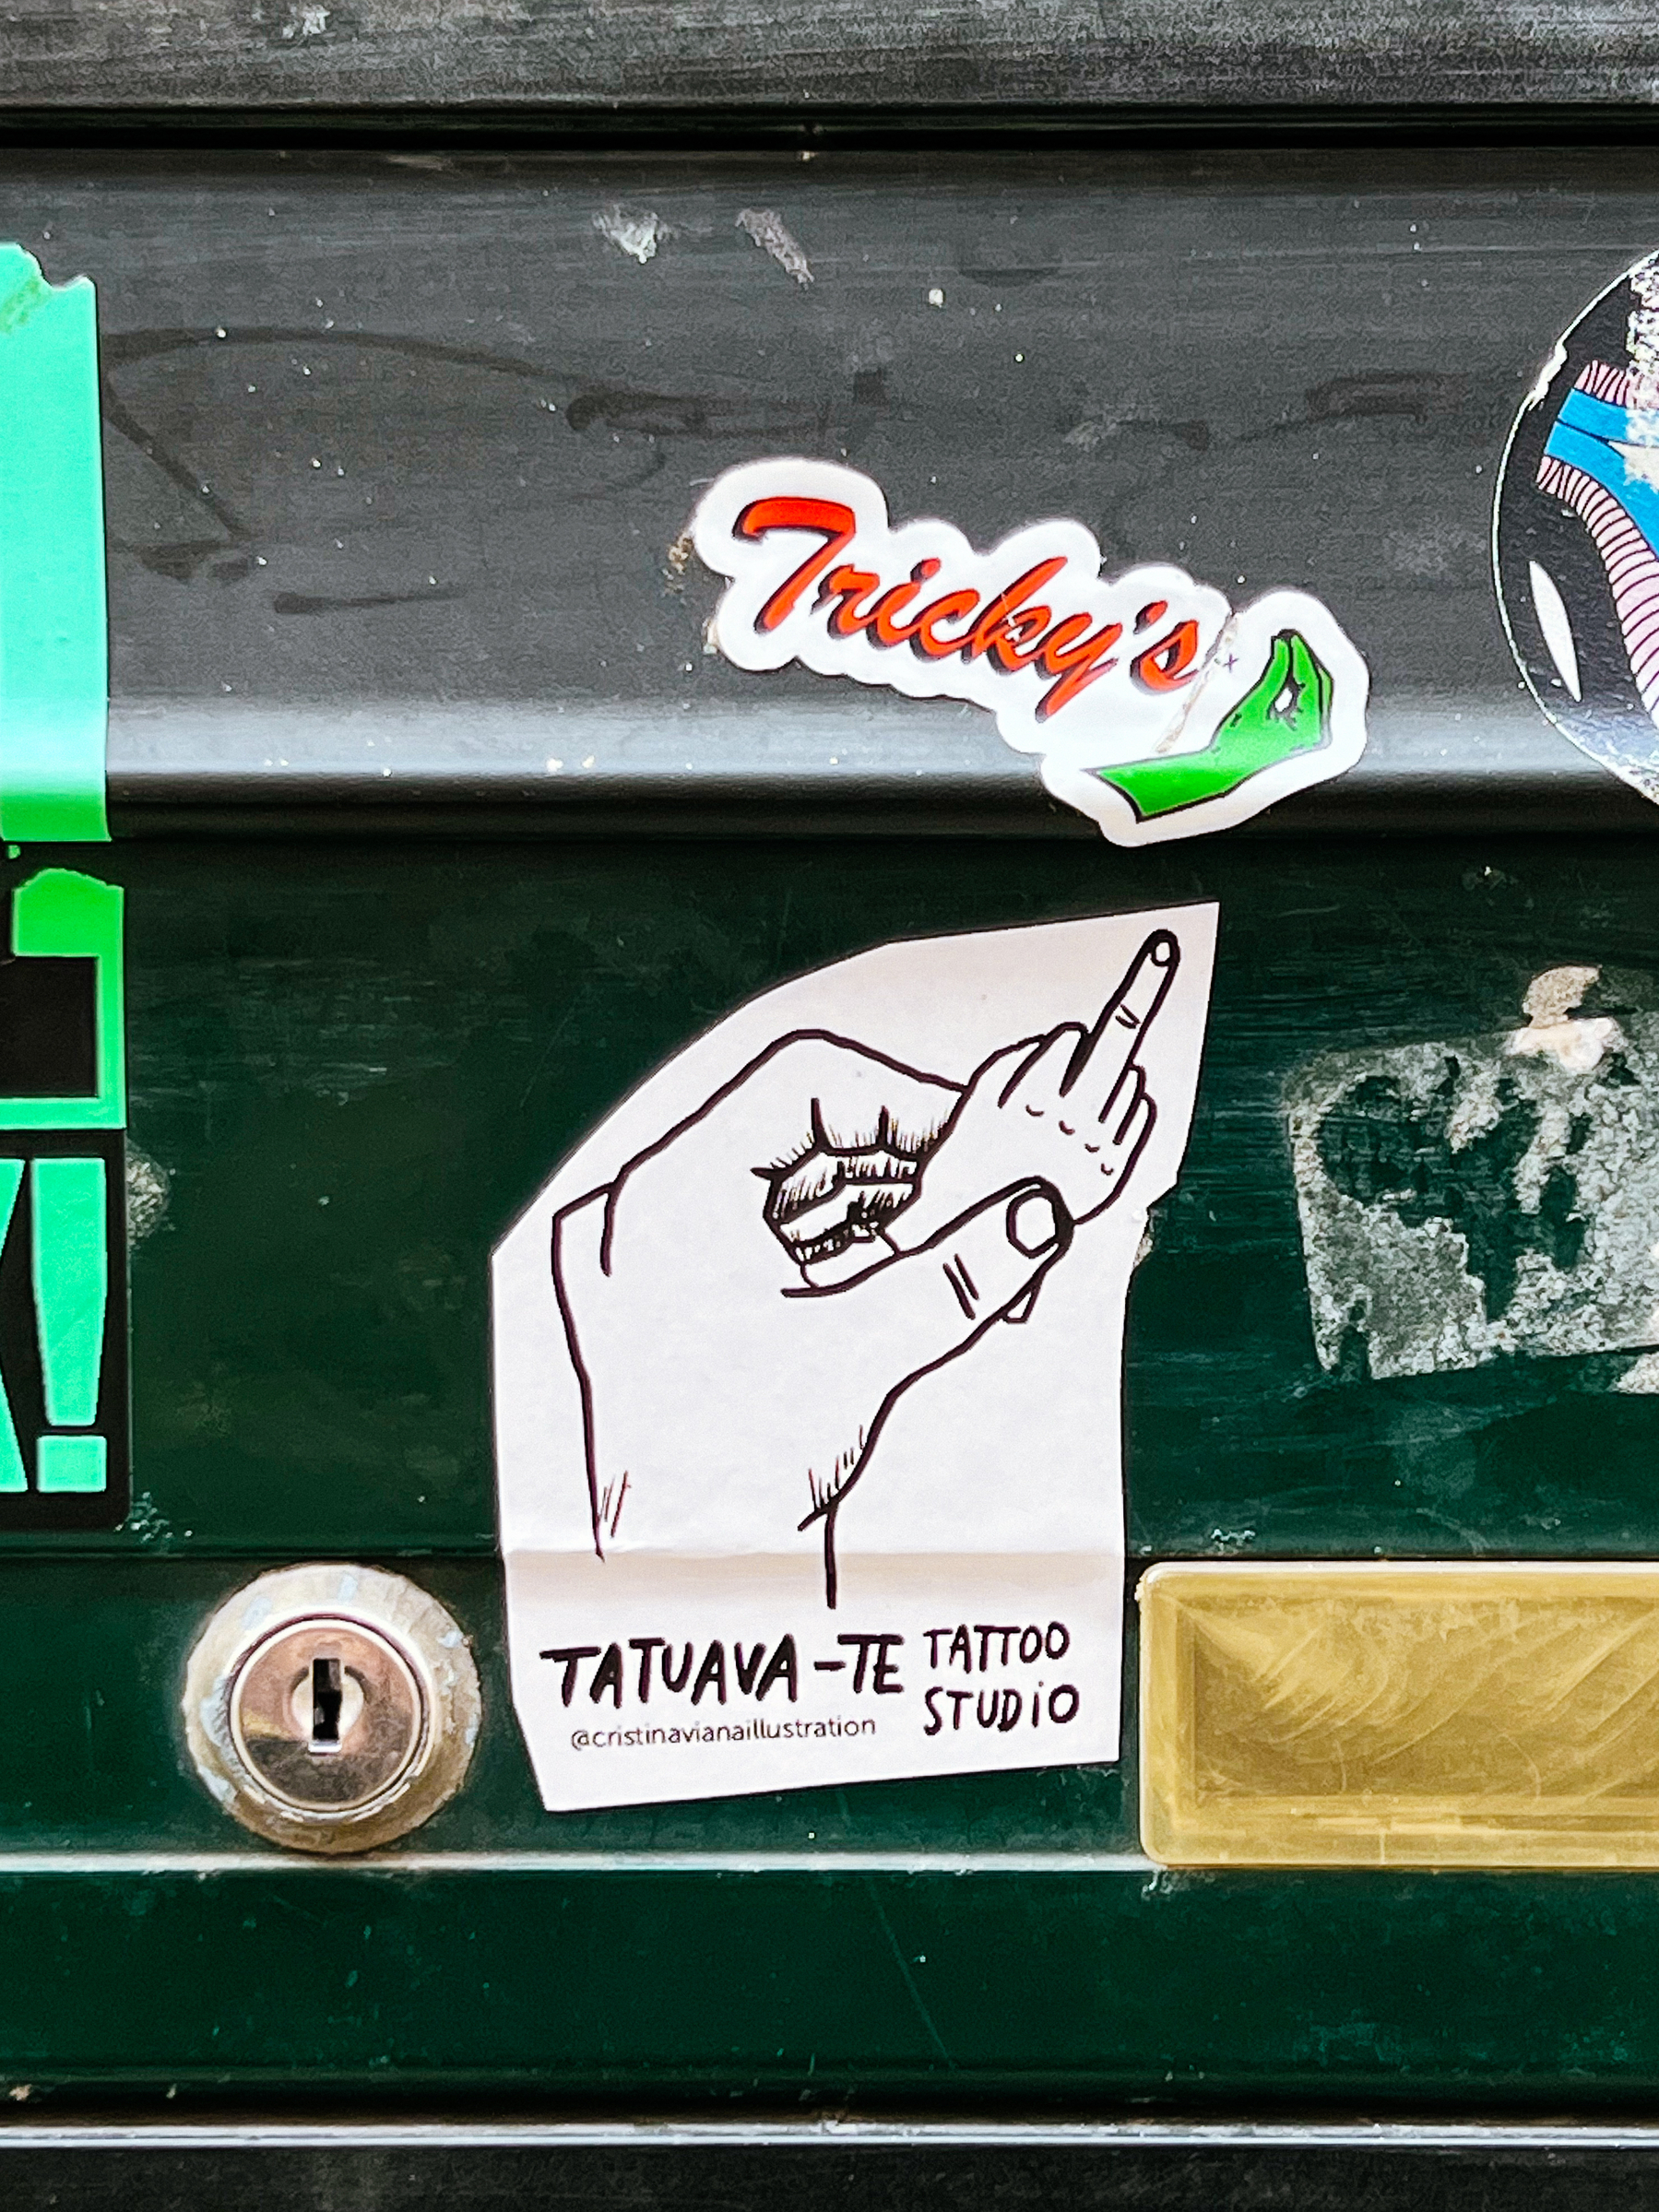 A sticker that is an ad for a tattoo studio, as many of them are. Done in &ldquo;tattoo style&rdquo; drawing. A hand carefully holds another, smaller, hand. This second hand is giving us the finger. On top of that, unrelated but well placed, is the word &ldquo;Tricky&rsquo;s&rdquo;, and yet another hand. A green one, in the &ldquo;Italian speaking&rdquo; style.